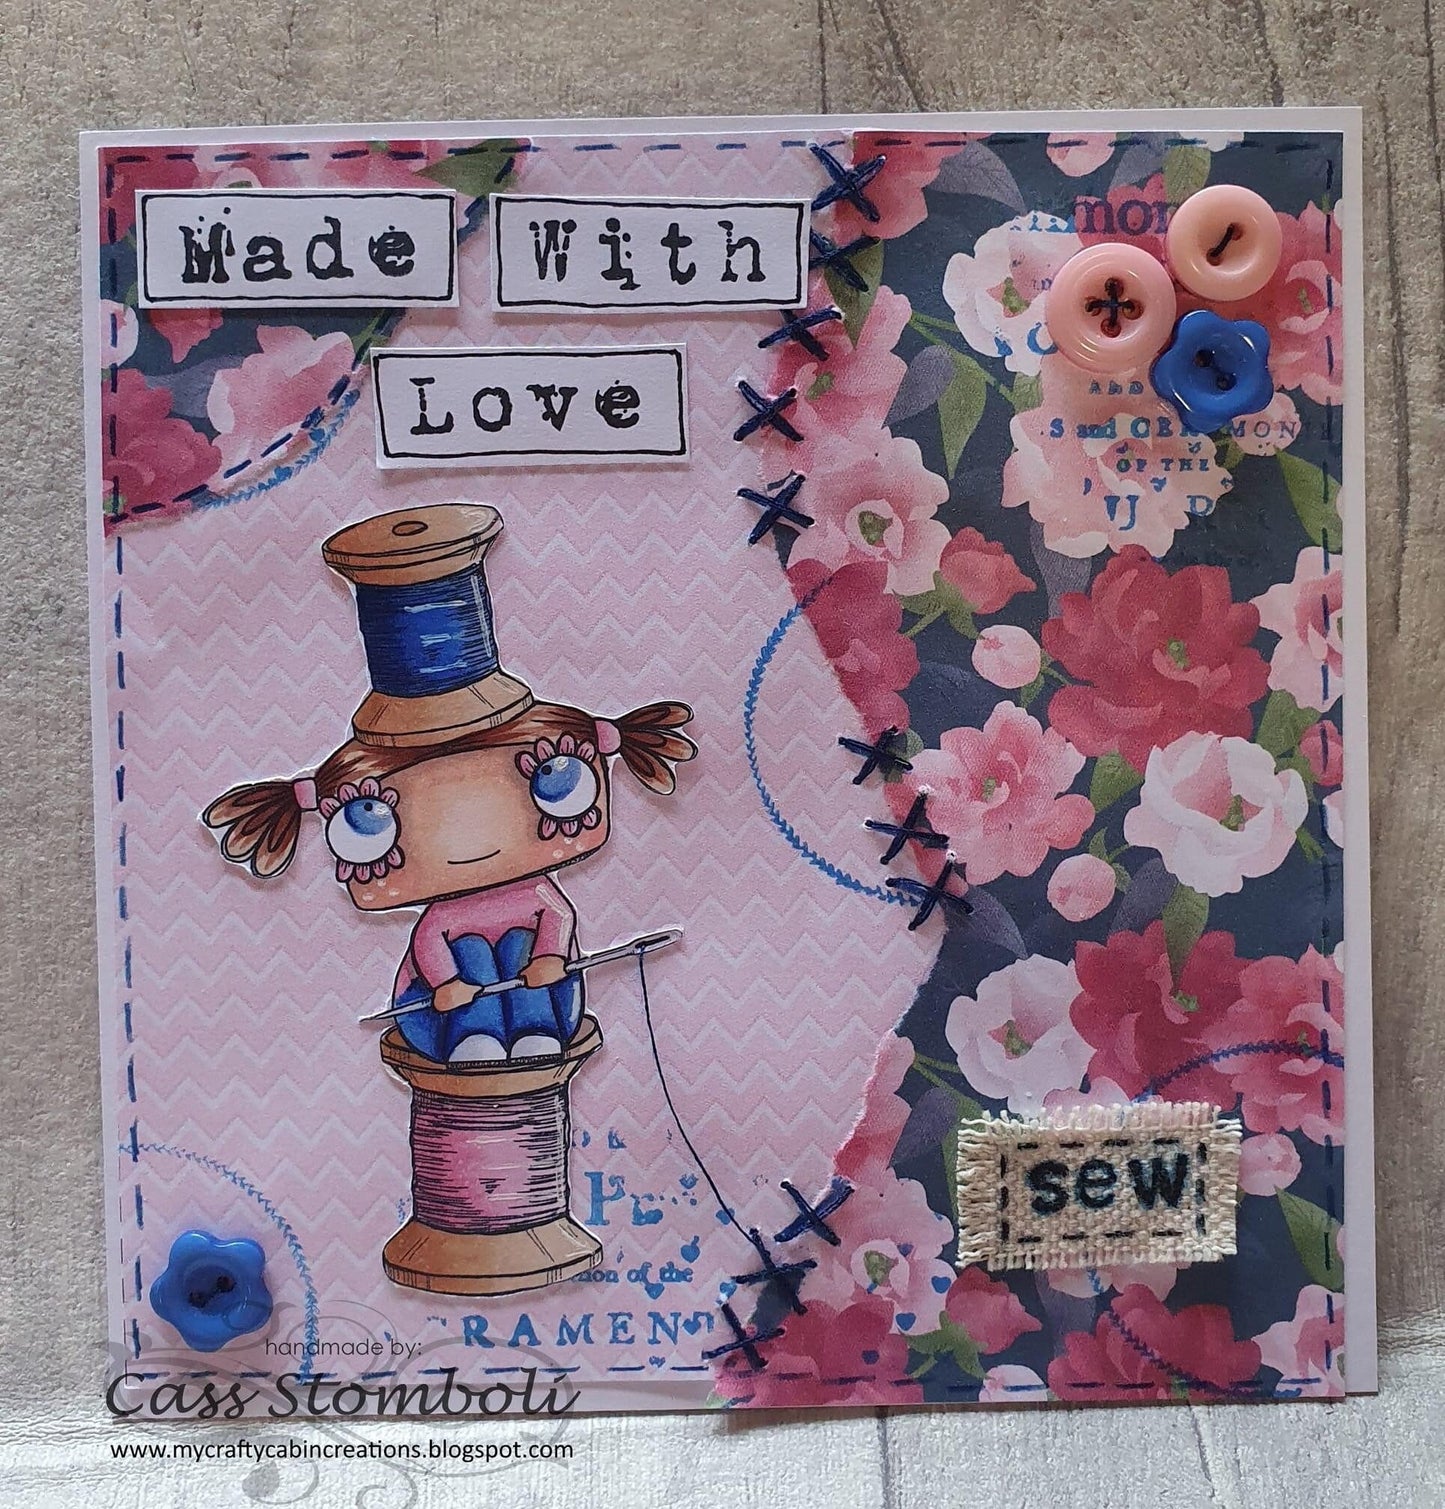 Stitches - 4 digi stamp bundle in png and jpg files